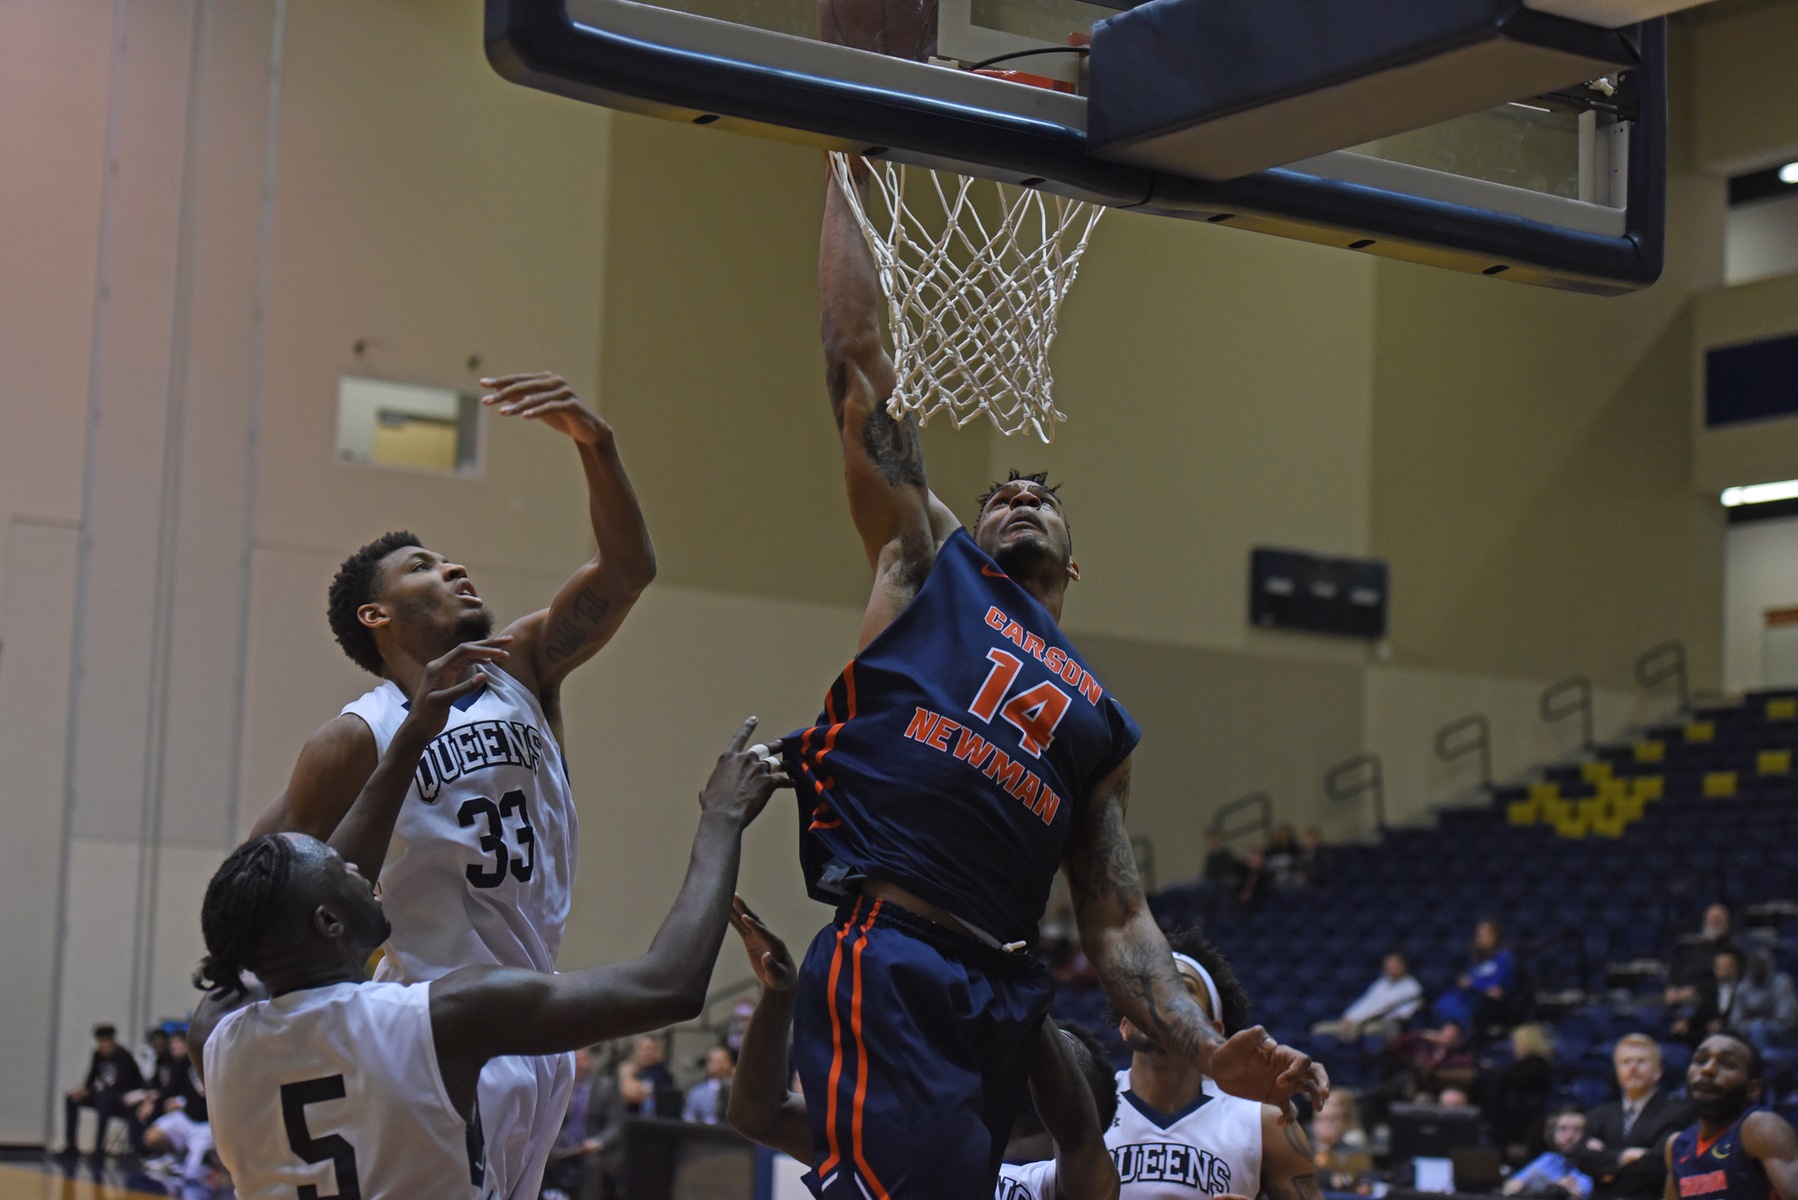 Nationally-ranked showdown set for Saturday between No. 24 Carson-Newman and No. 2 Queens